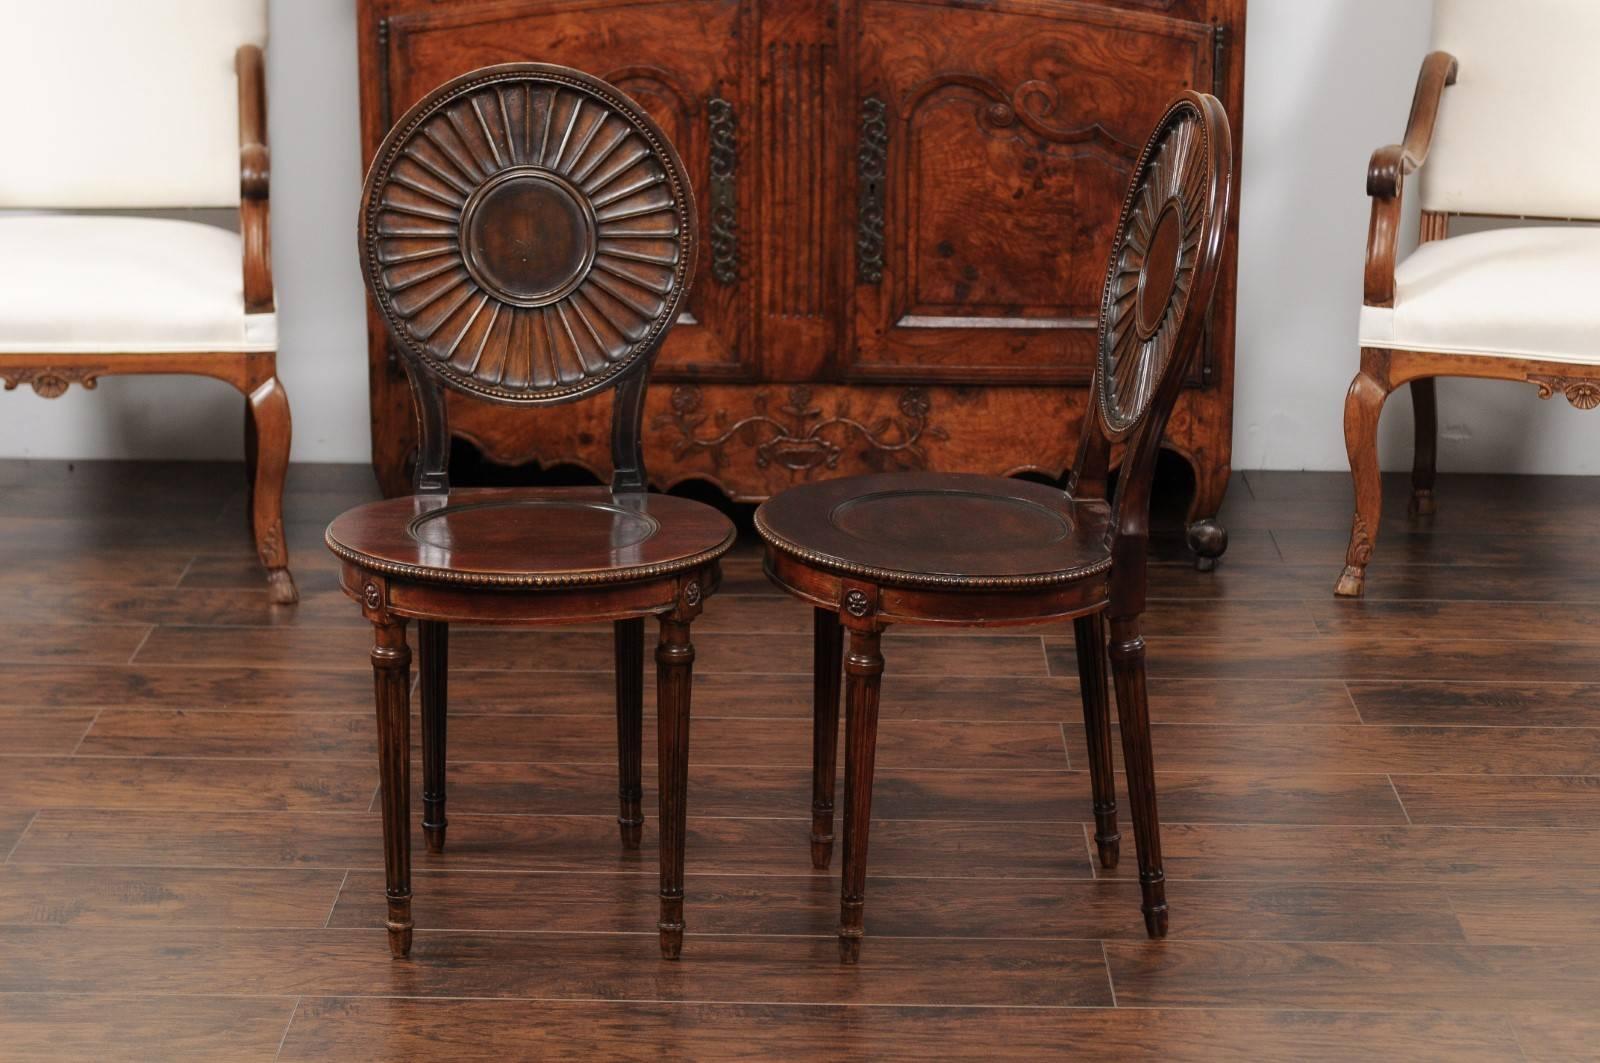 A pair of English mahogany hall chairs from the second half of the 19th century, with round backs and fluted legs. Each of this pair of English hall chairs features an eye-catching slightly slanted round back, adorned with a central medallion from